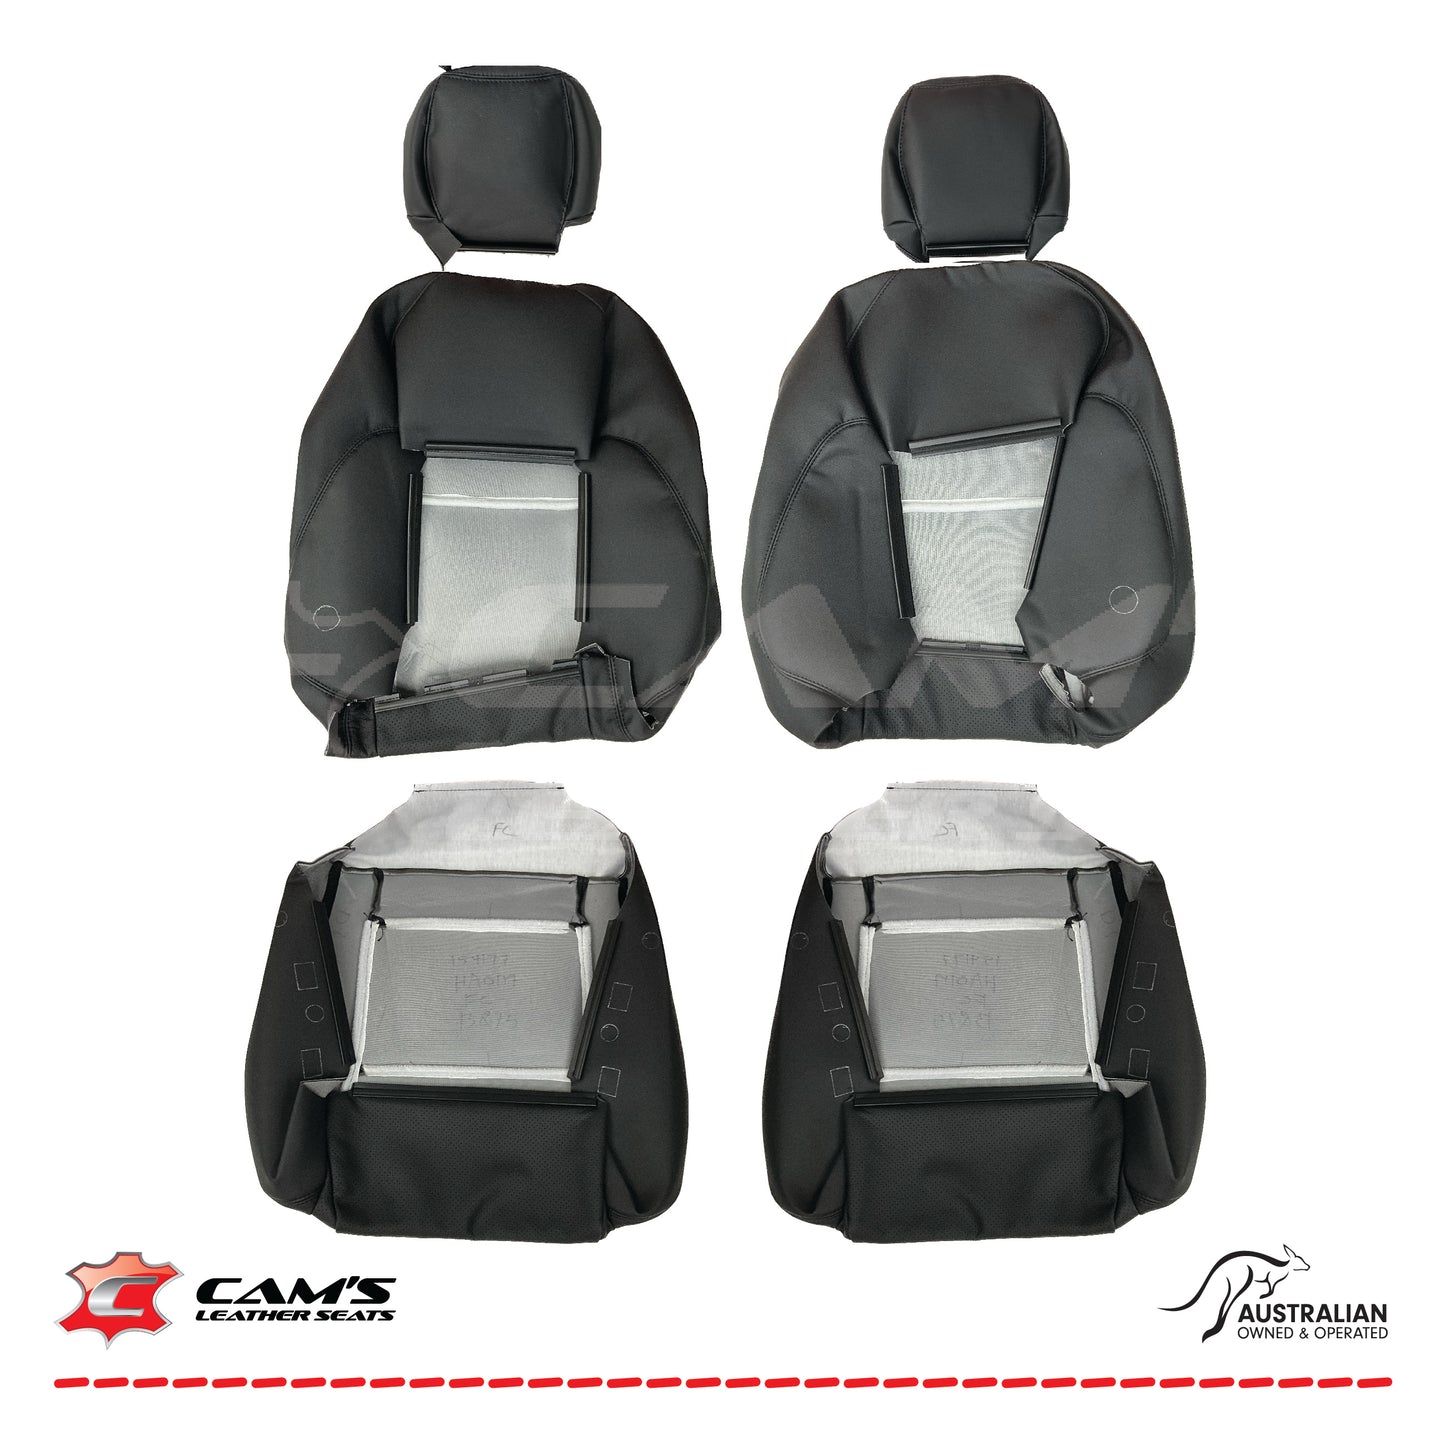 LEATHER SEATS TRIM KIT FOR HOLDEN VY S2 / VZ SS UTE FACTORY ANTHRACITE STYLE